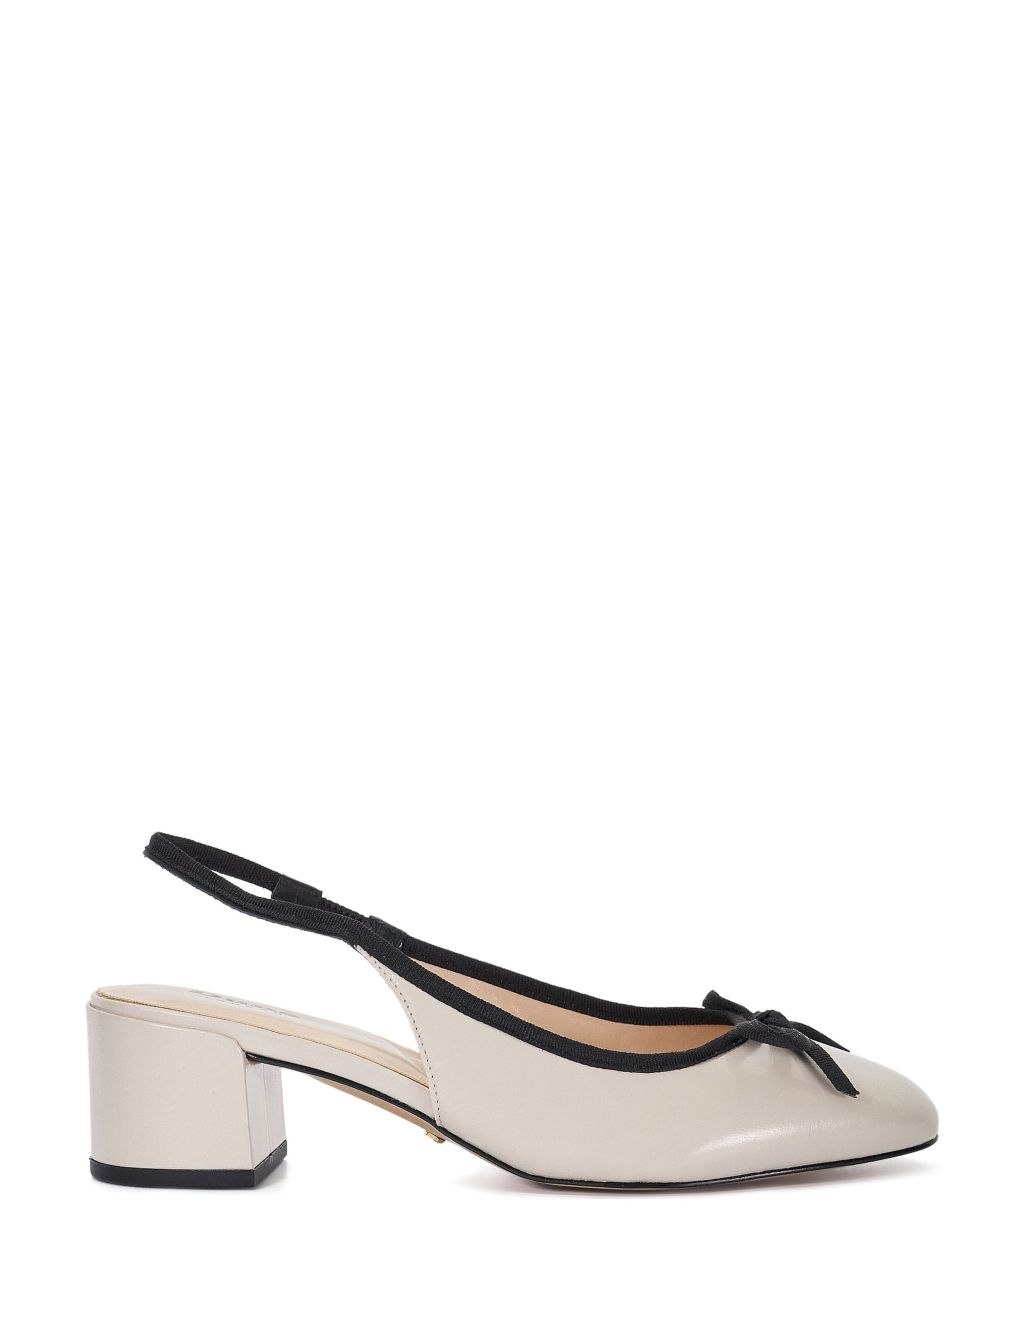 Leather Patent Block Heel Slingback Shoes 3 of 5